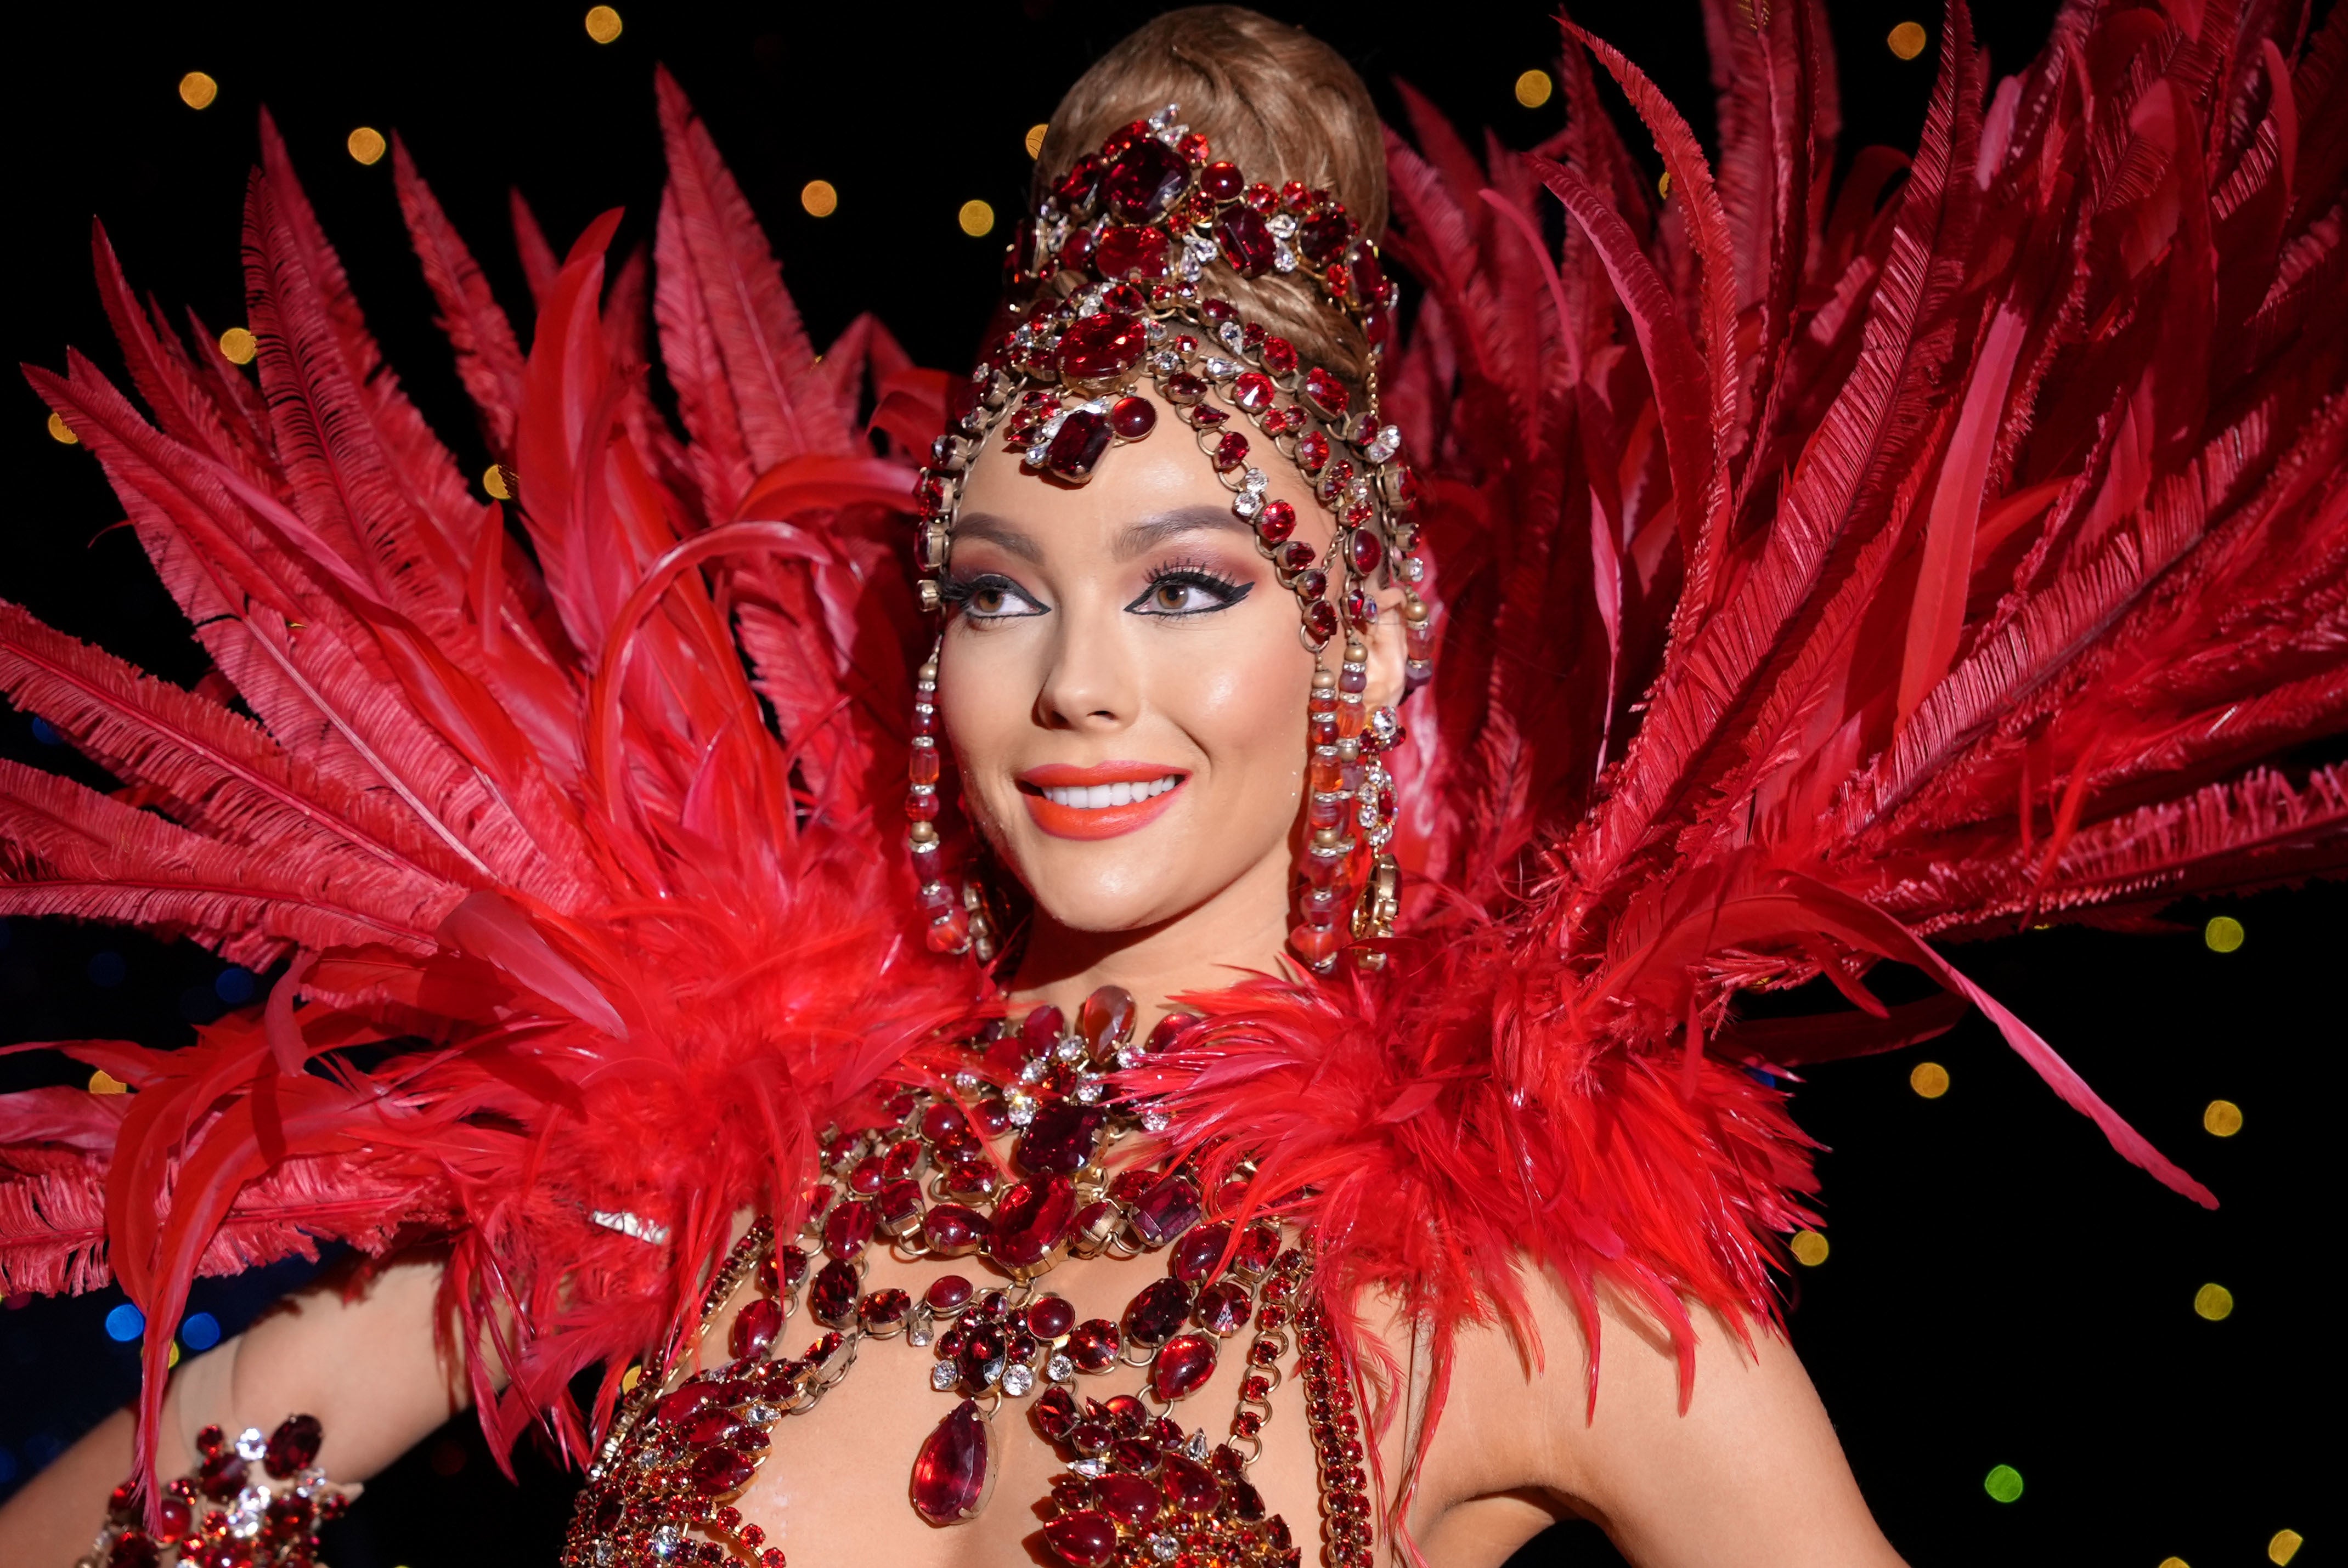 Dancer ‘Tooney’ in a red feather costume at the Moulin Rouge